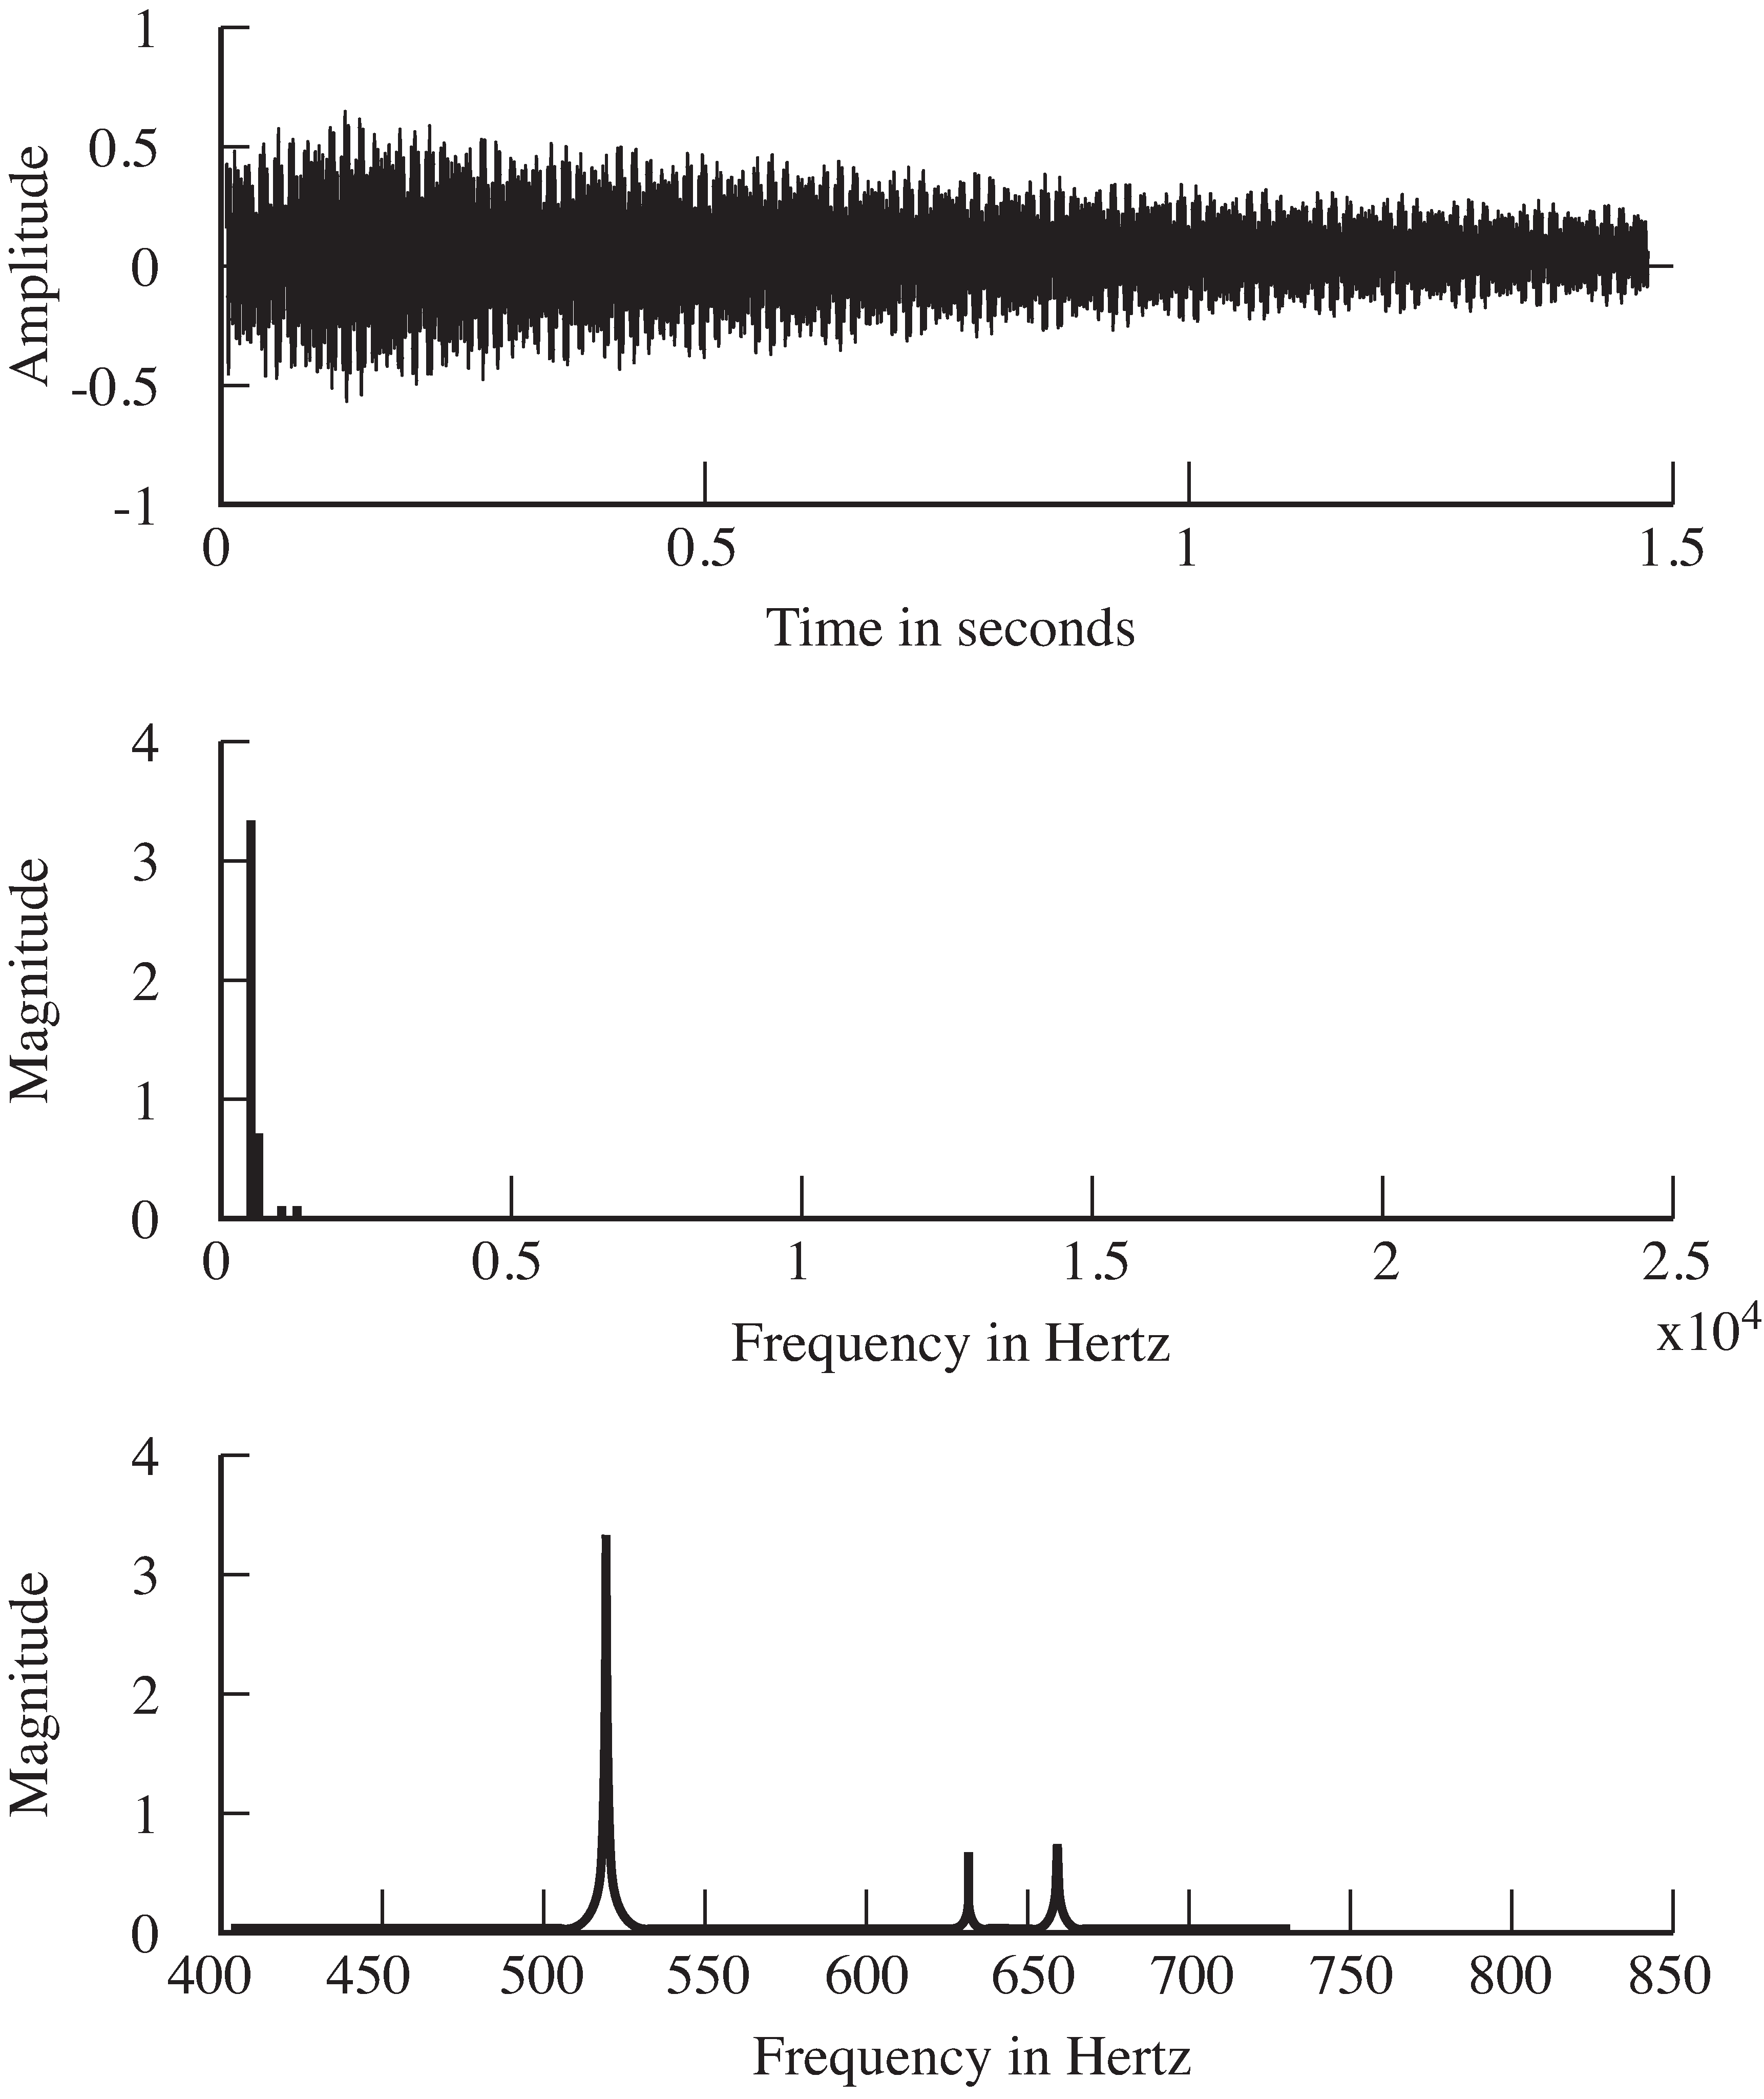 Time and frequency plots of the gong waveform. The top figure shows the decay of the signal over 1.5 seconds. The middle figure shows the magnitude spectrum, and the bottom figure zooms in on the low frequency portion so that the frequencies are more legible.